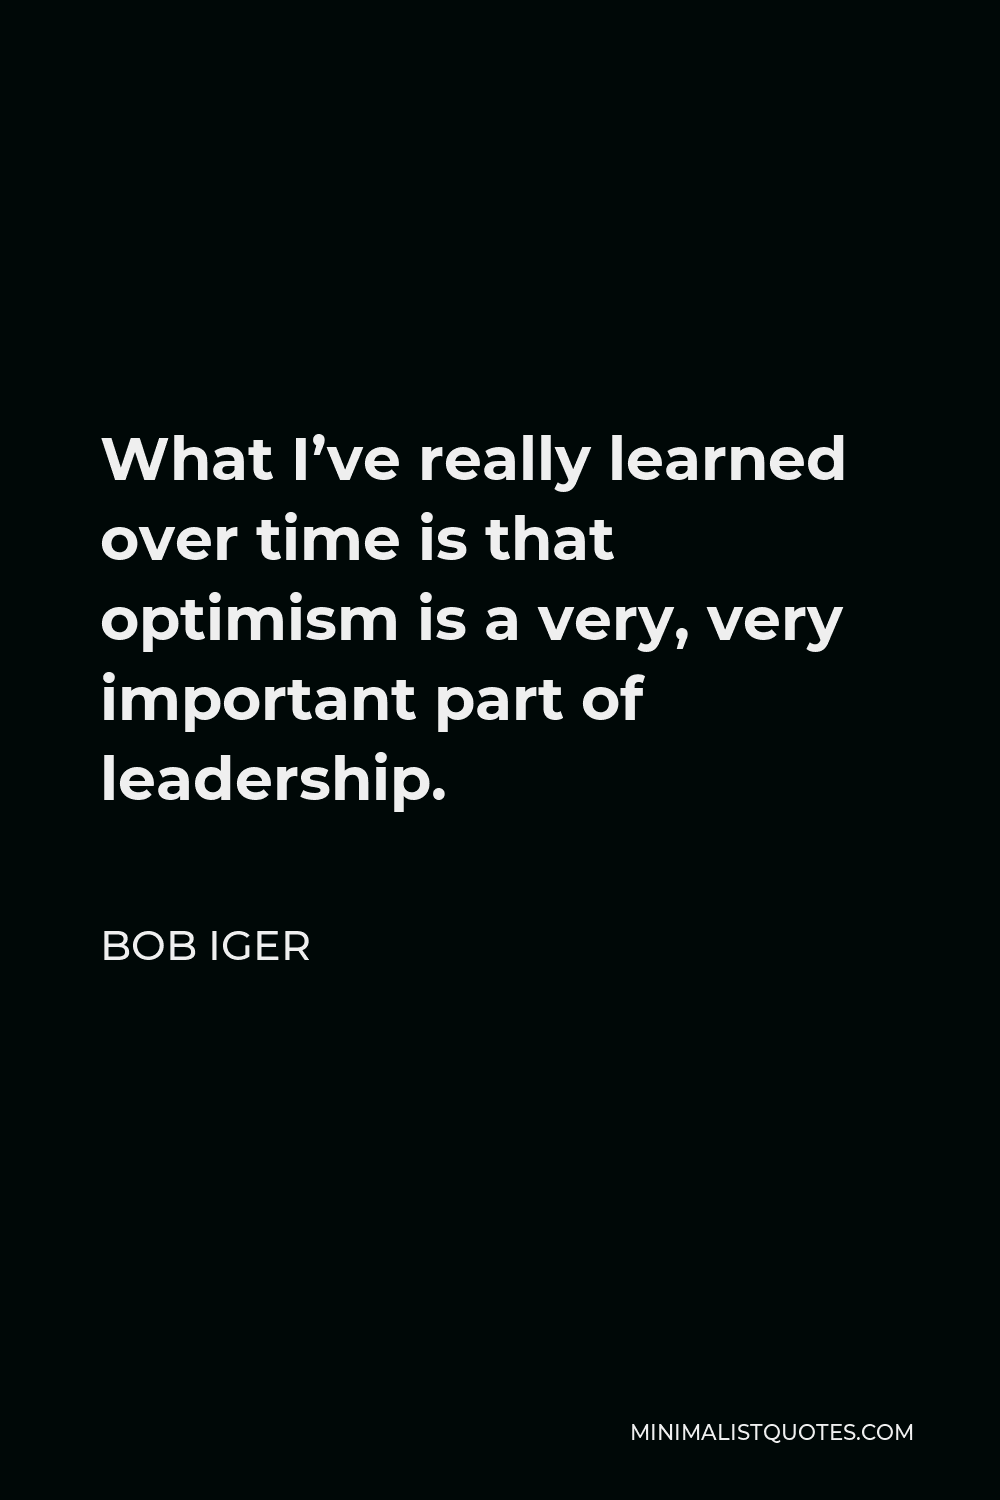 Bob Iger Quote - What I’ve really learned over time is that optimism is a very, very important part of leadership.